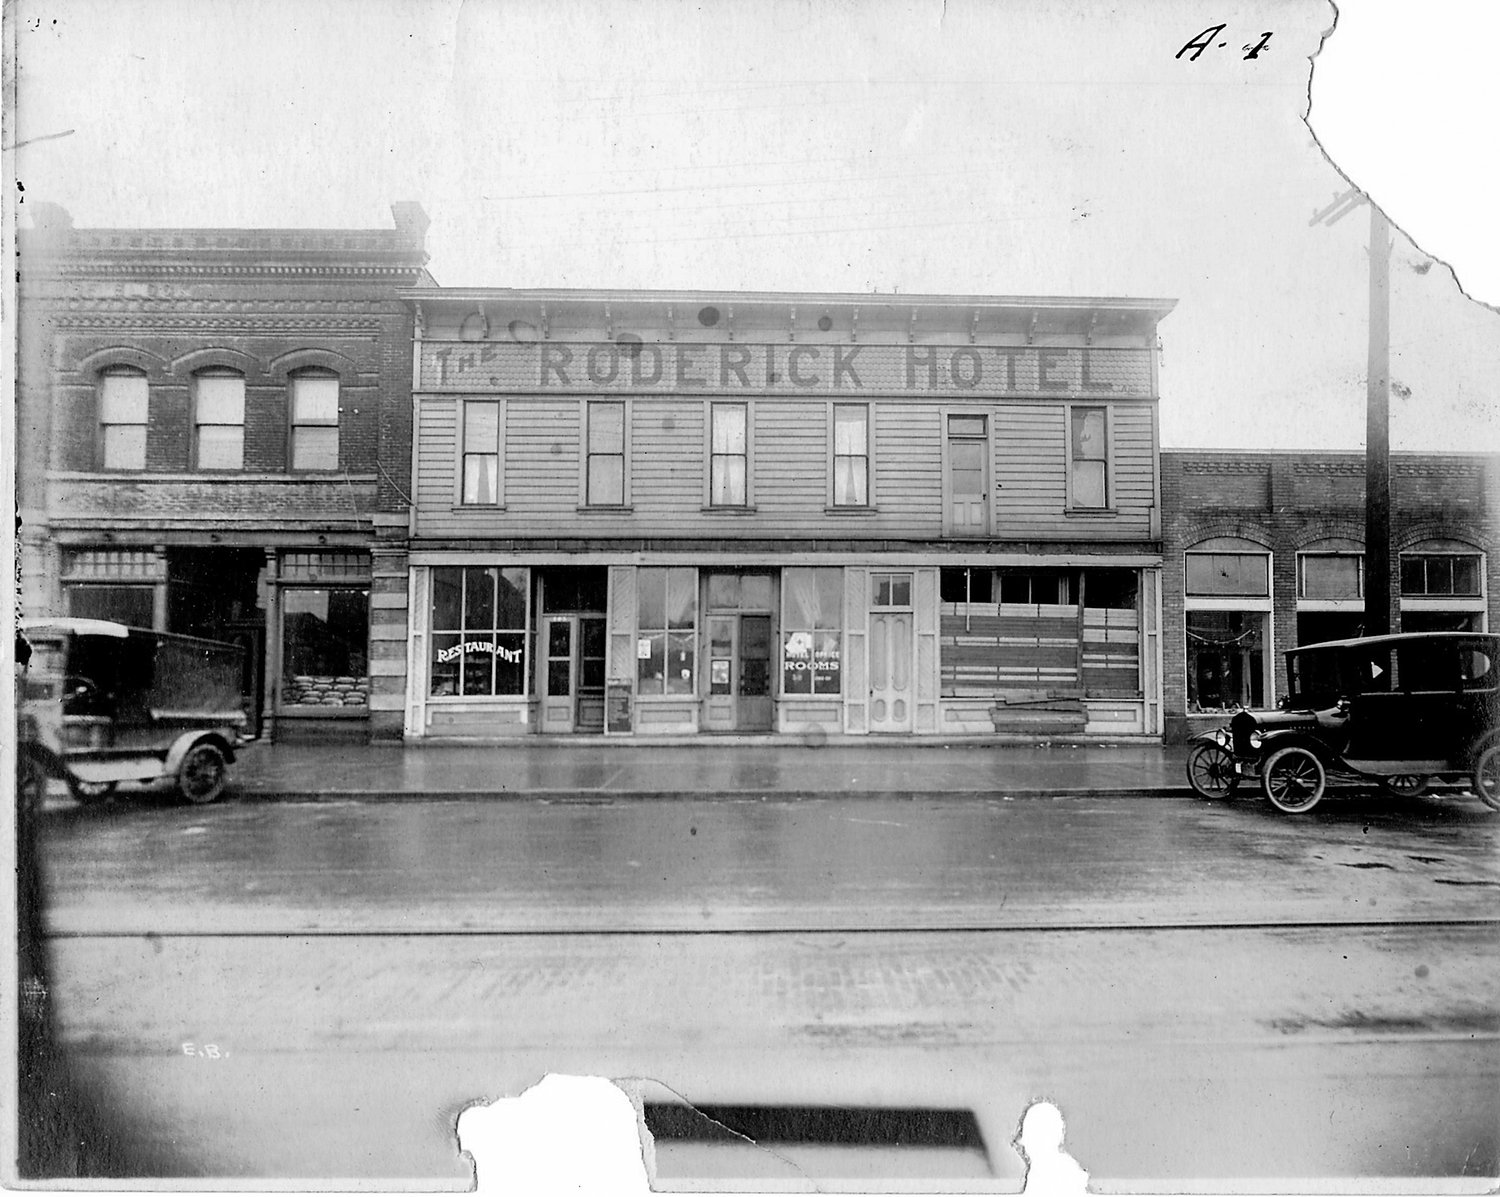 The Lewis County Historical Museum last year received photos and other evidence from the 1920 trial of the Wobblies involved in the 1919 Centralia Massacre. This photo shows the Roderick Hotel where the IWW Hall was located.